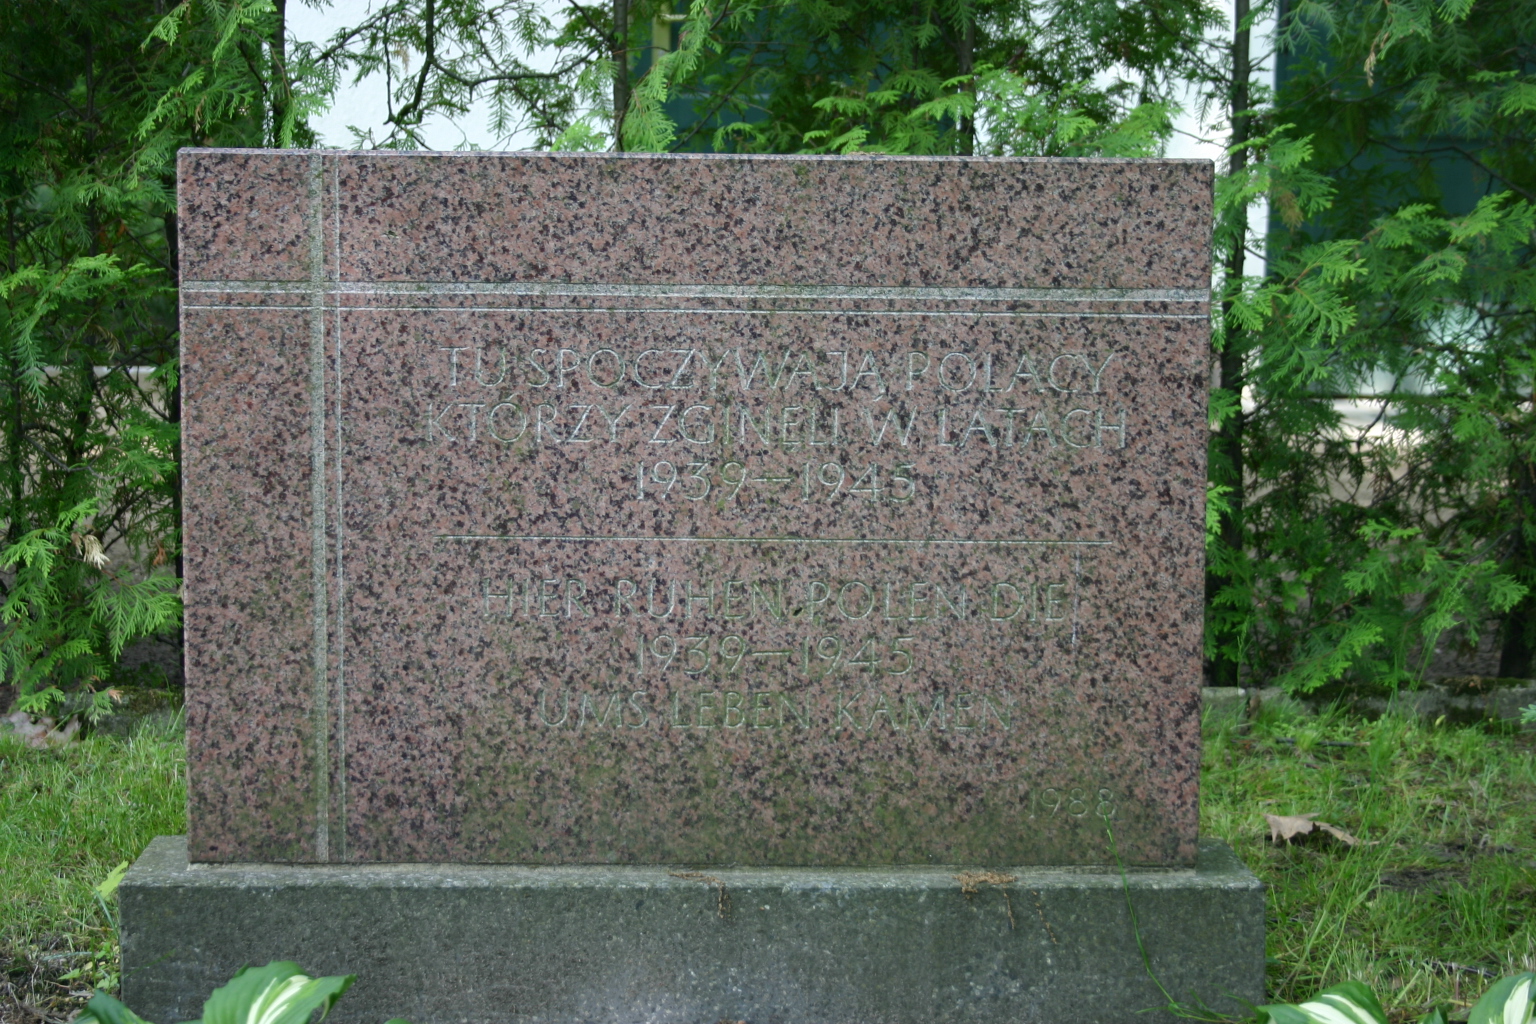 Memorial stone for the polish victims